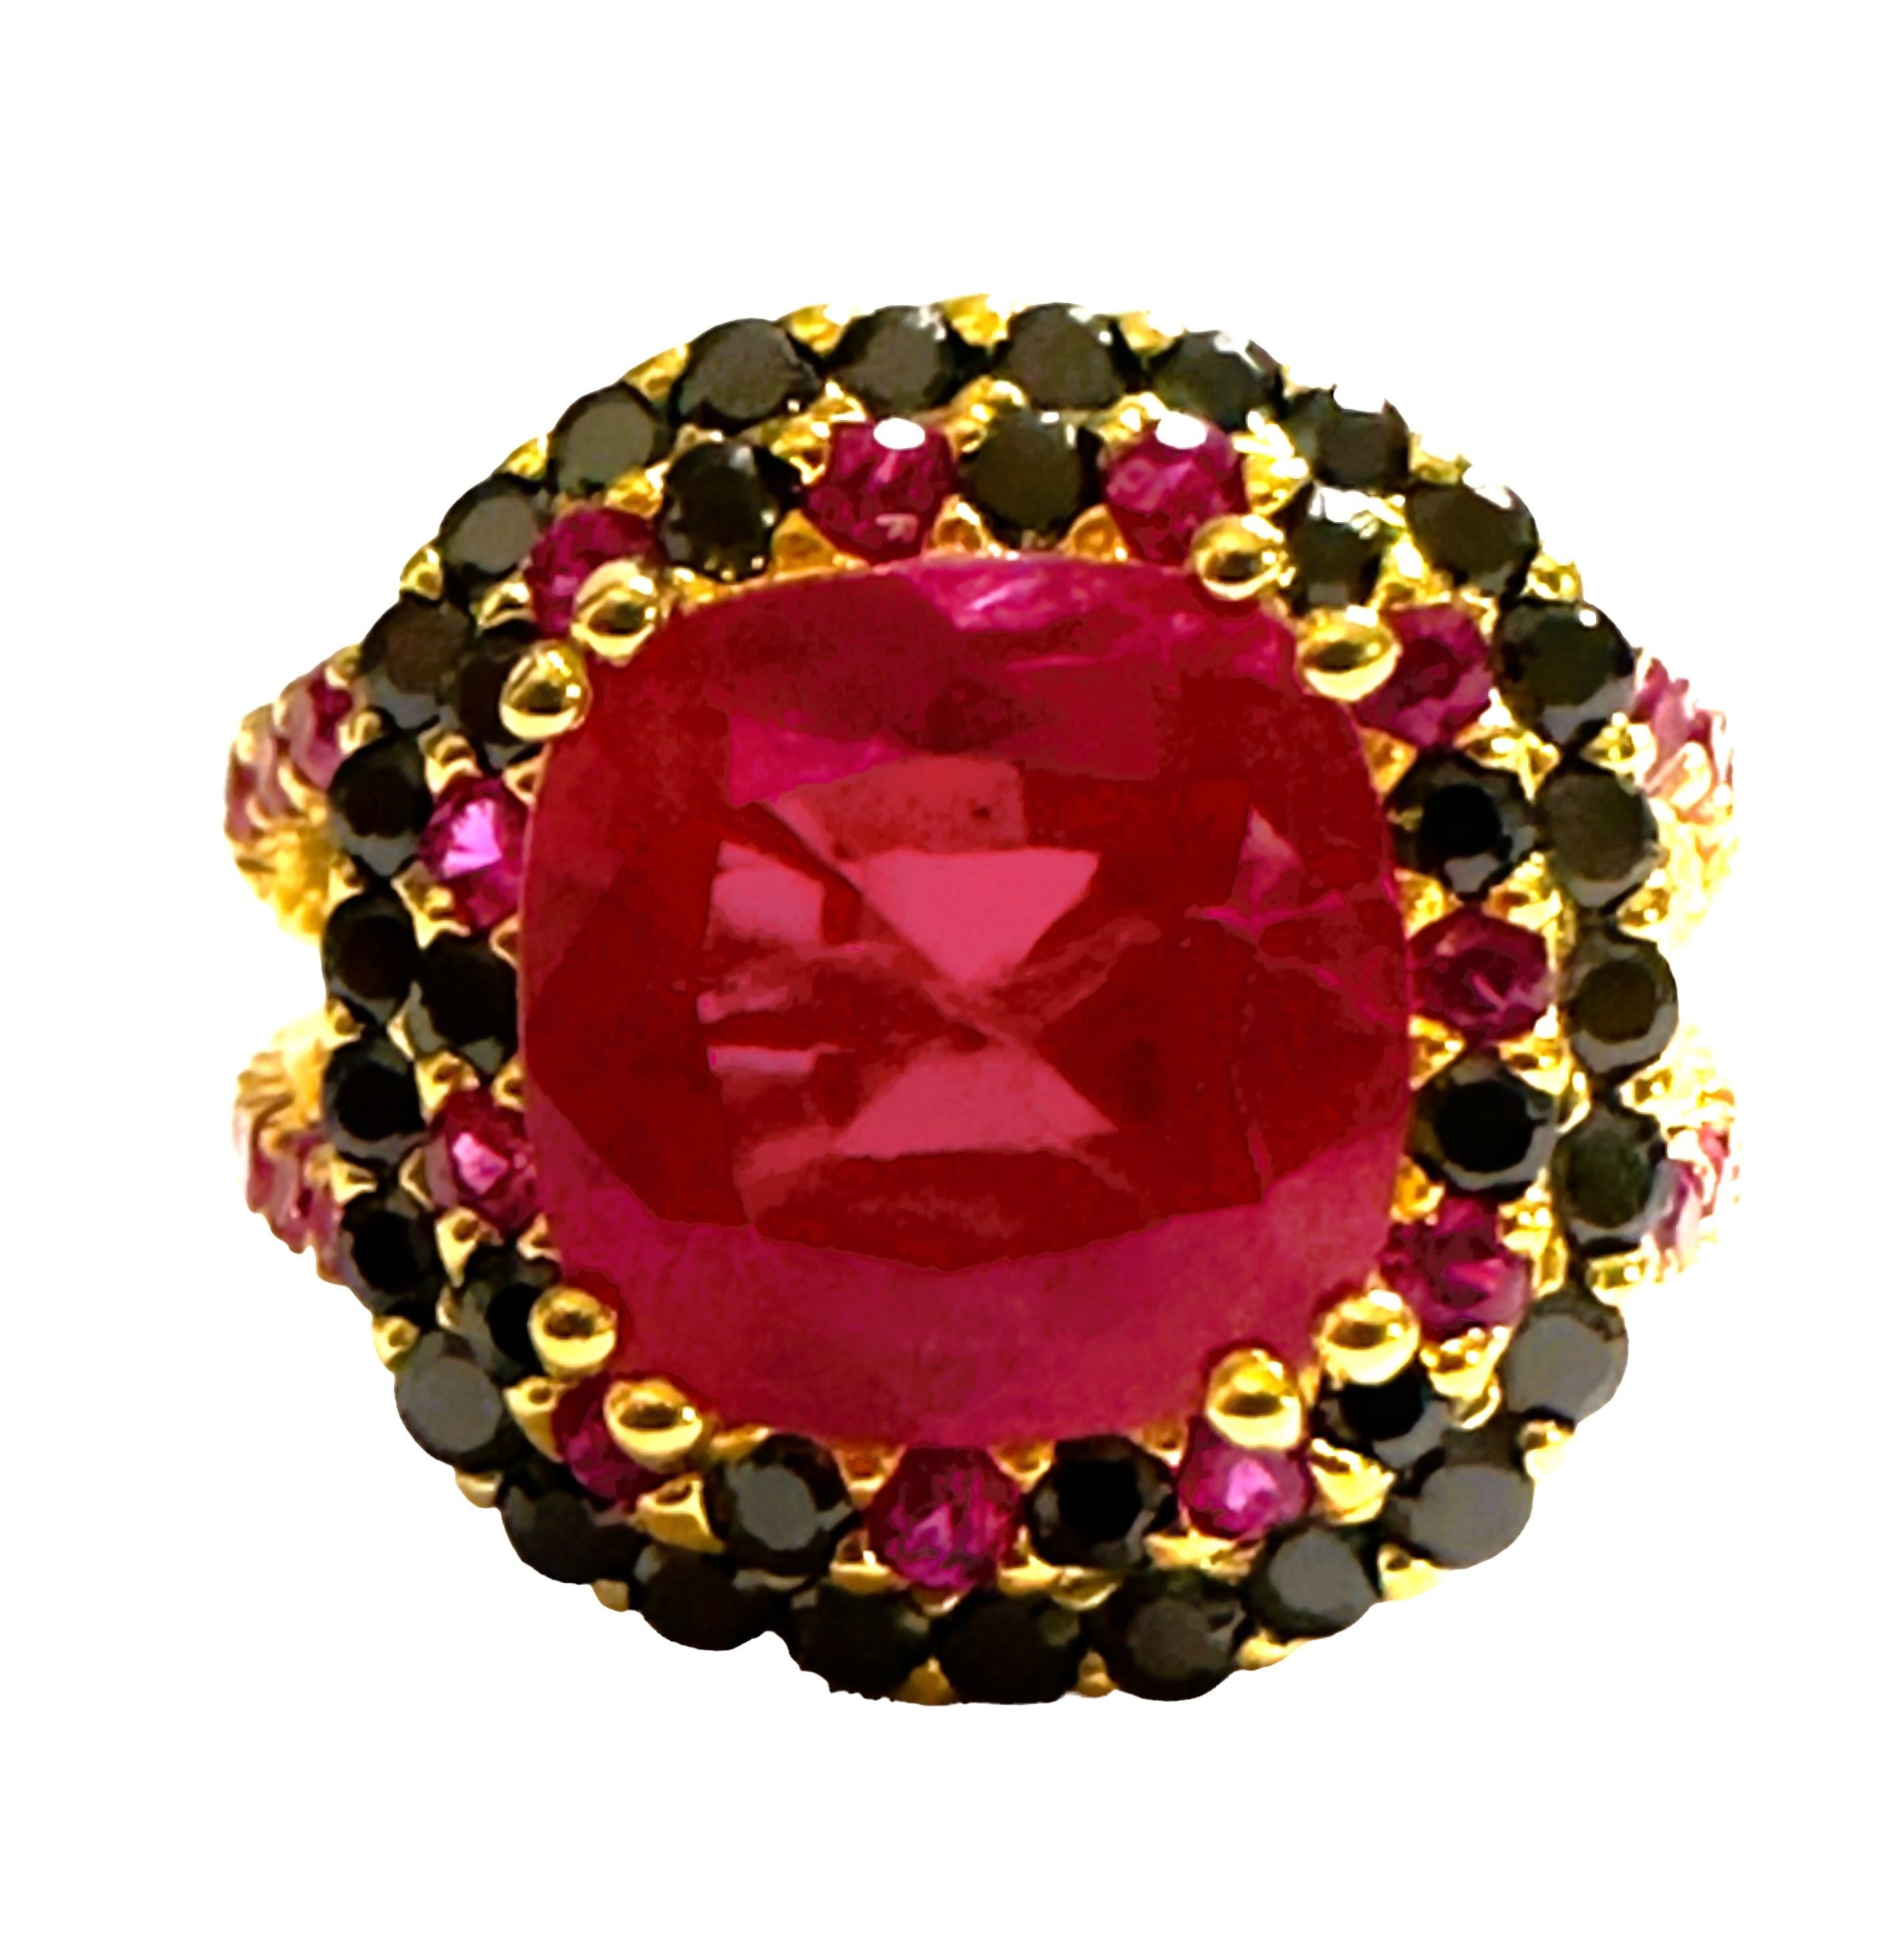 What a beautiful combination of colors in this ring.  The ring is a size 6.5.  It from Africa and is just exquisite. It is a cushion cut and is 5.80 Ct   The main stone is 9.8 mm. It has a beautiful diamond cut Pink Sapphire and Black Spinel stones